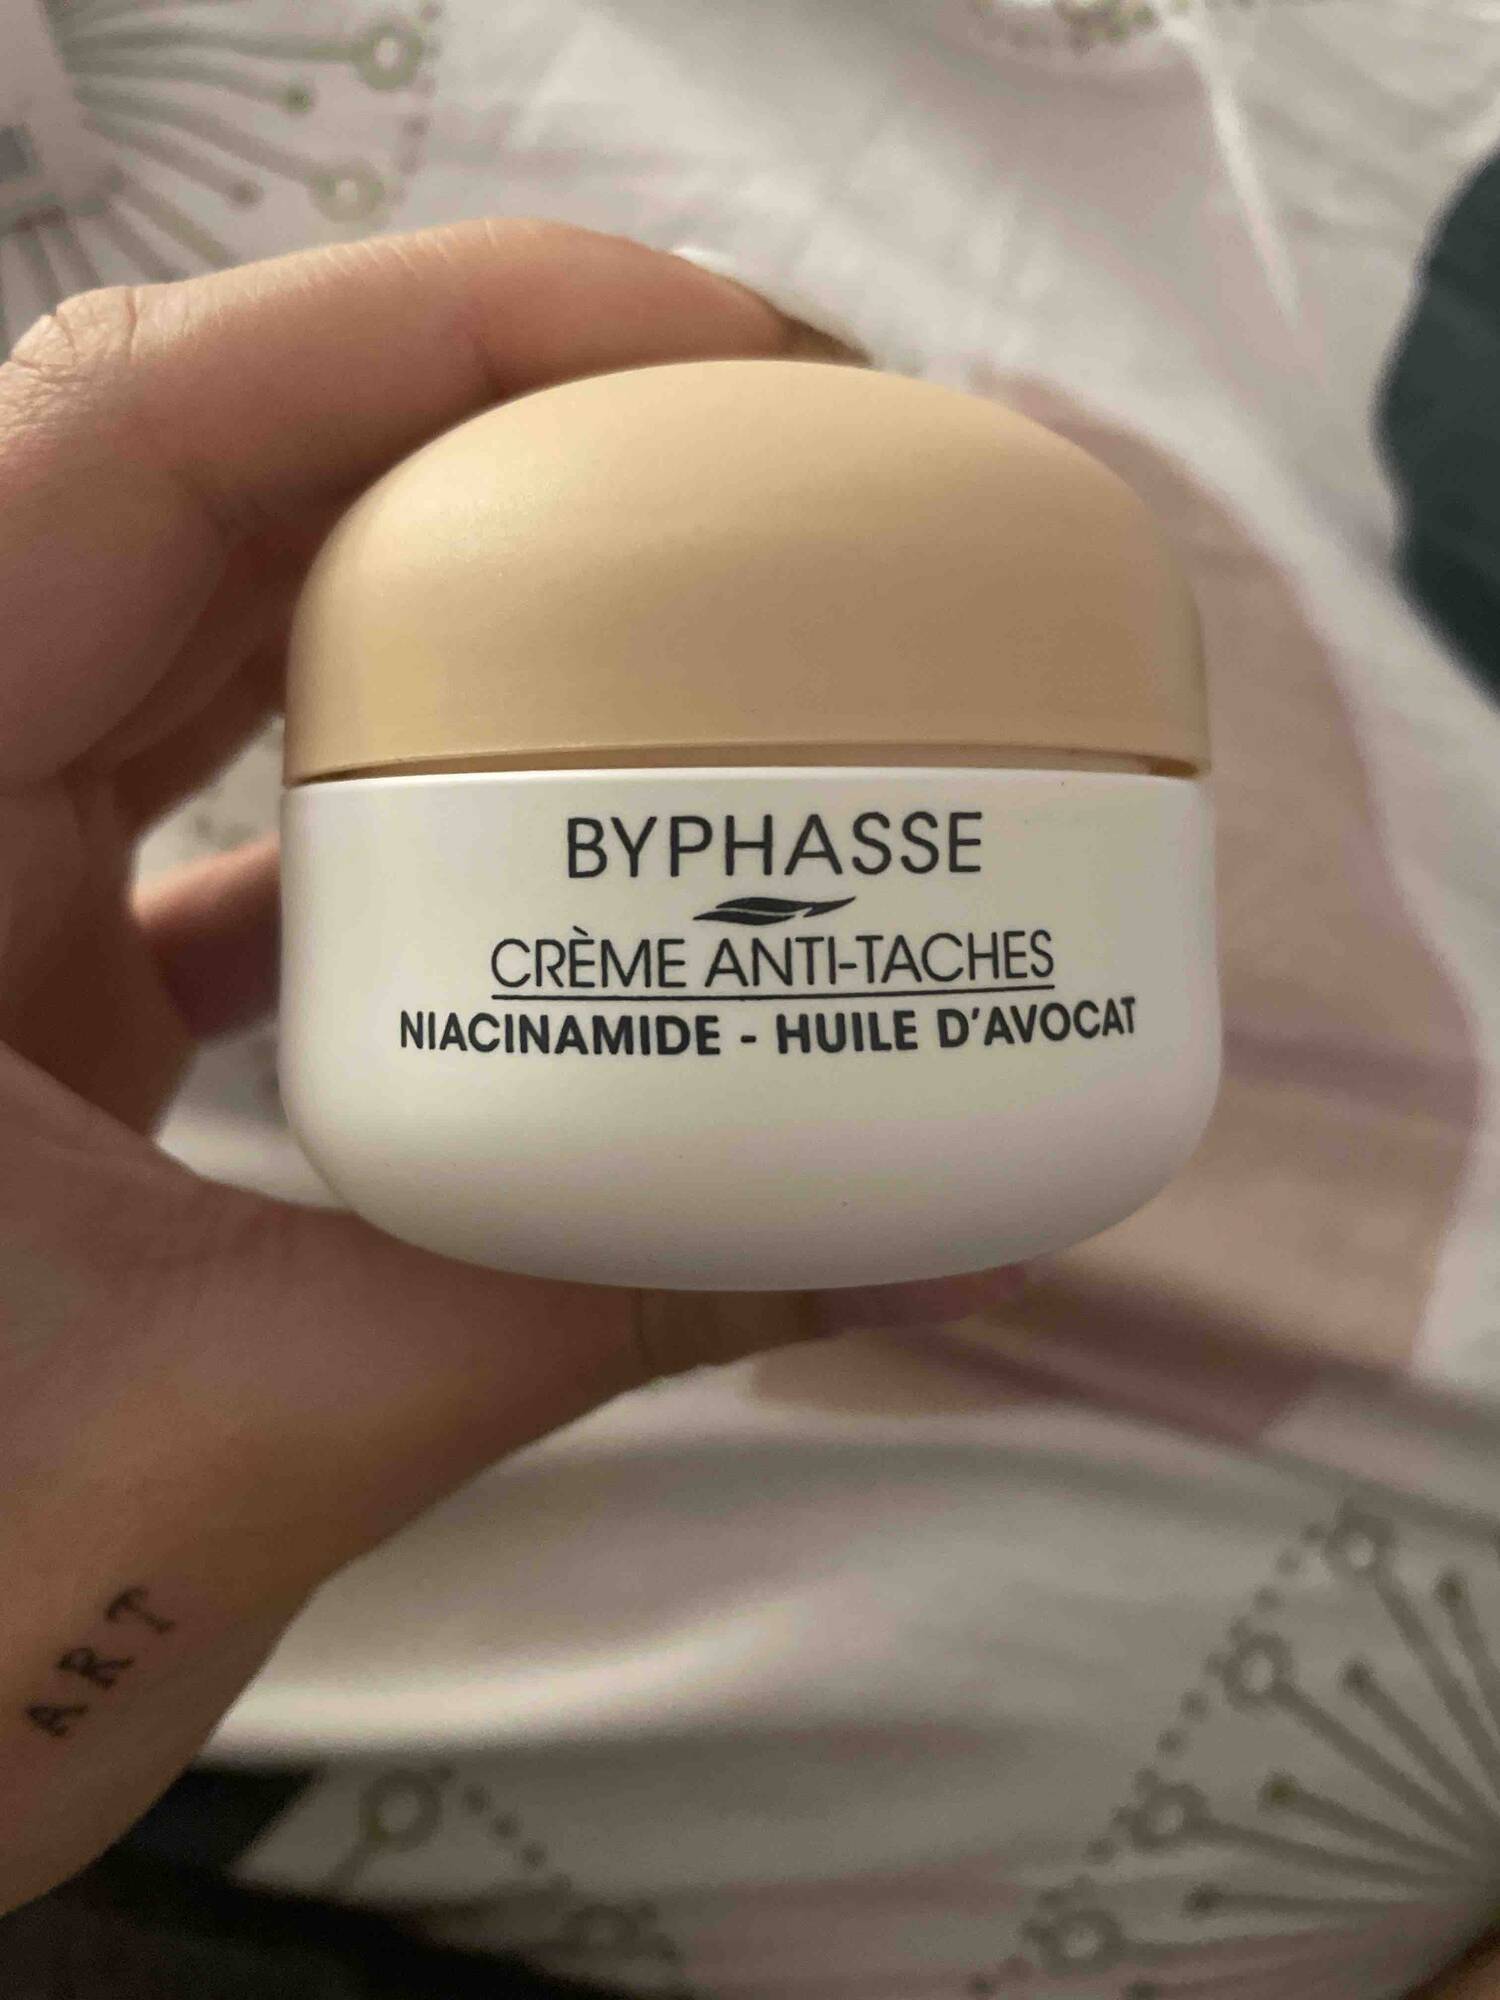 BYPHASSE - Crème anti-taches niacinamide